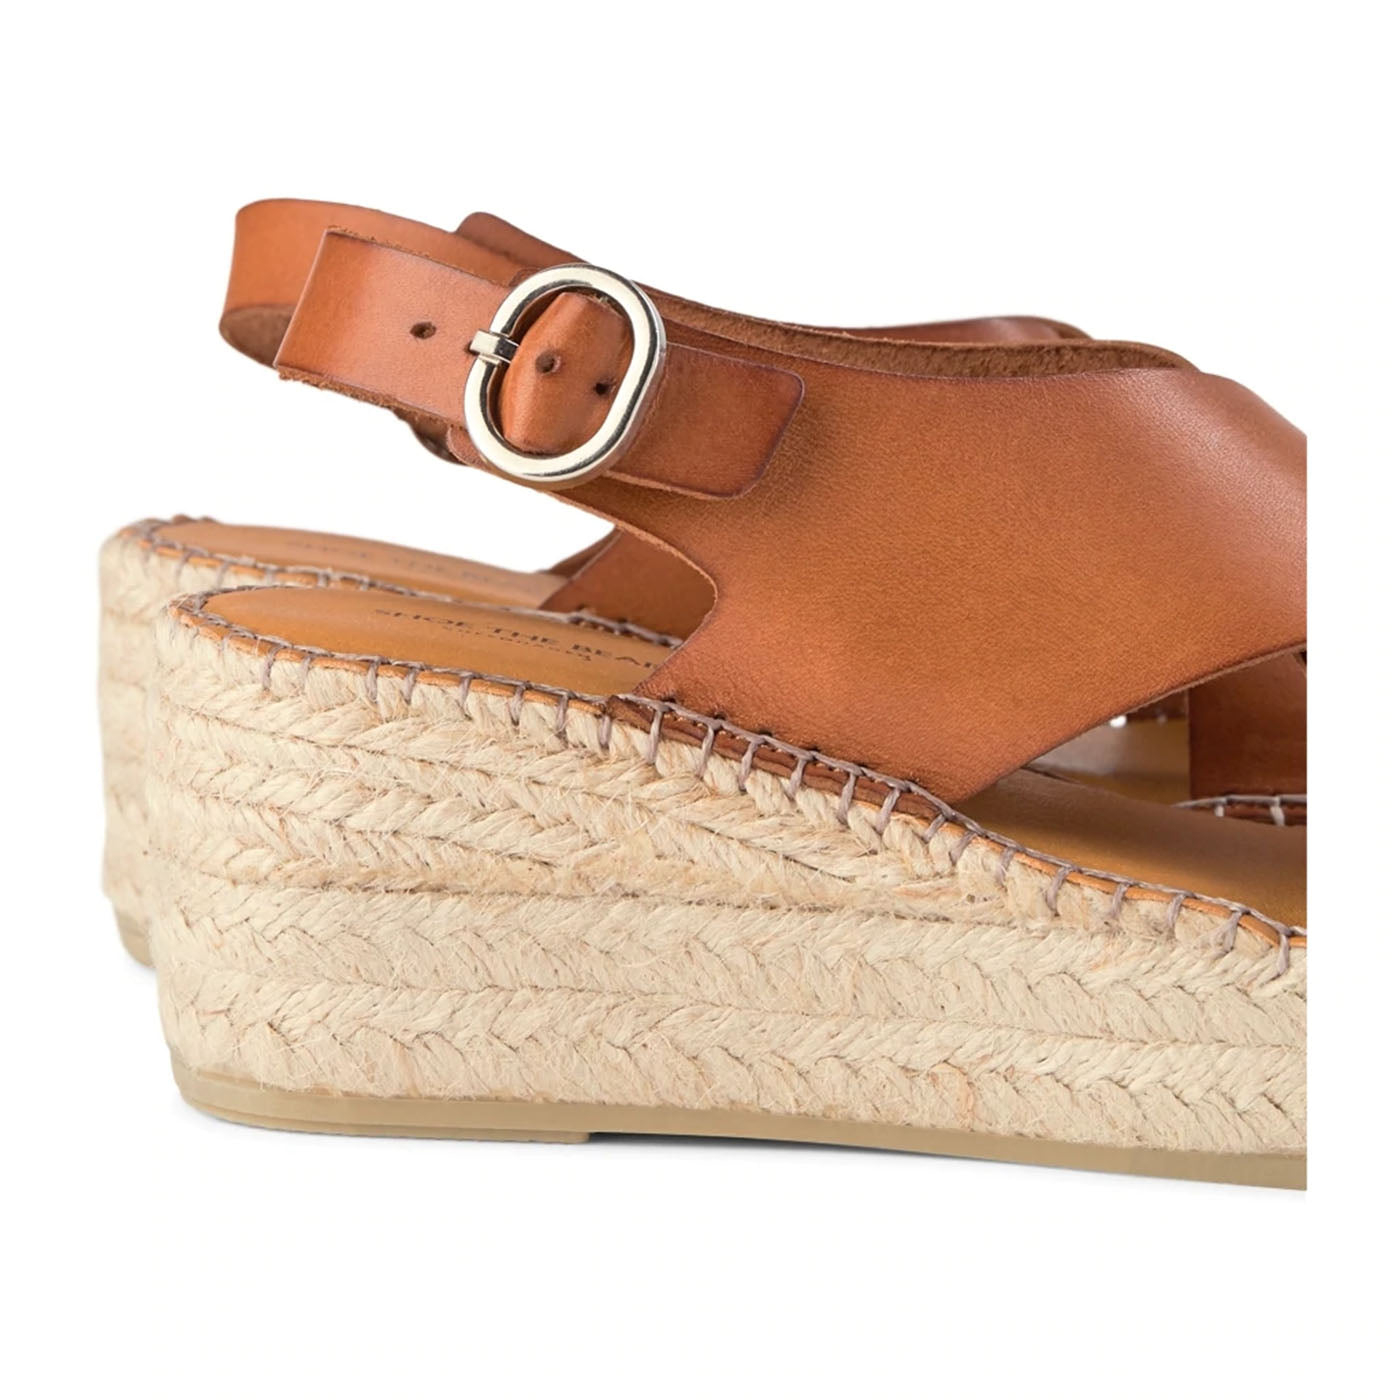 SHOE THE BEAR WOMENS Orchid wedge leather Espadrilles 135 TAN